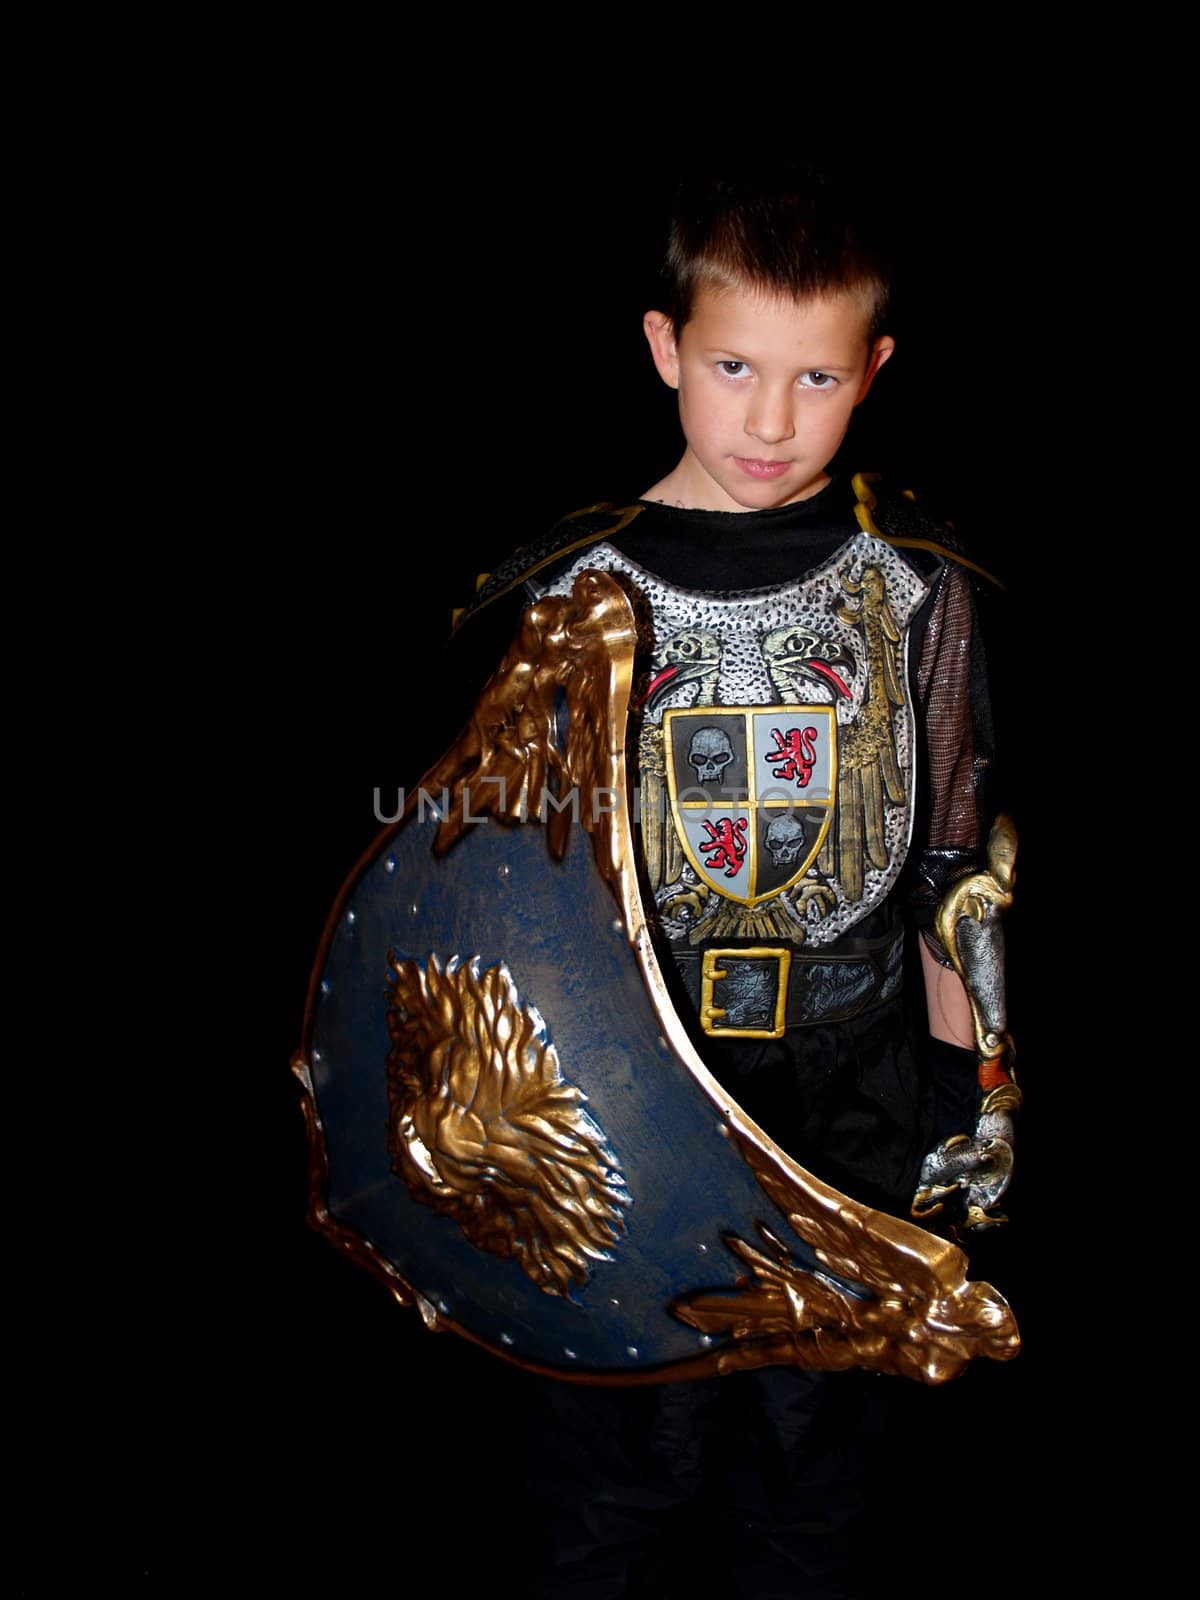 Little boy in a dark knight costume with a shield